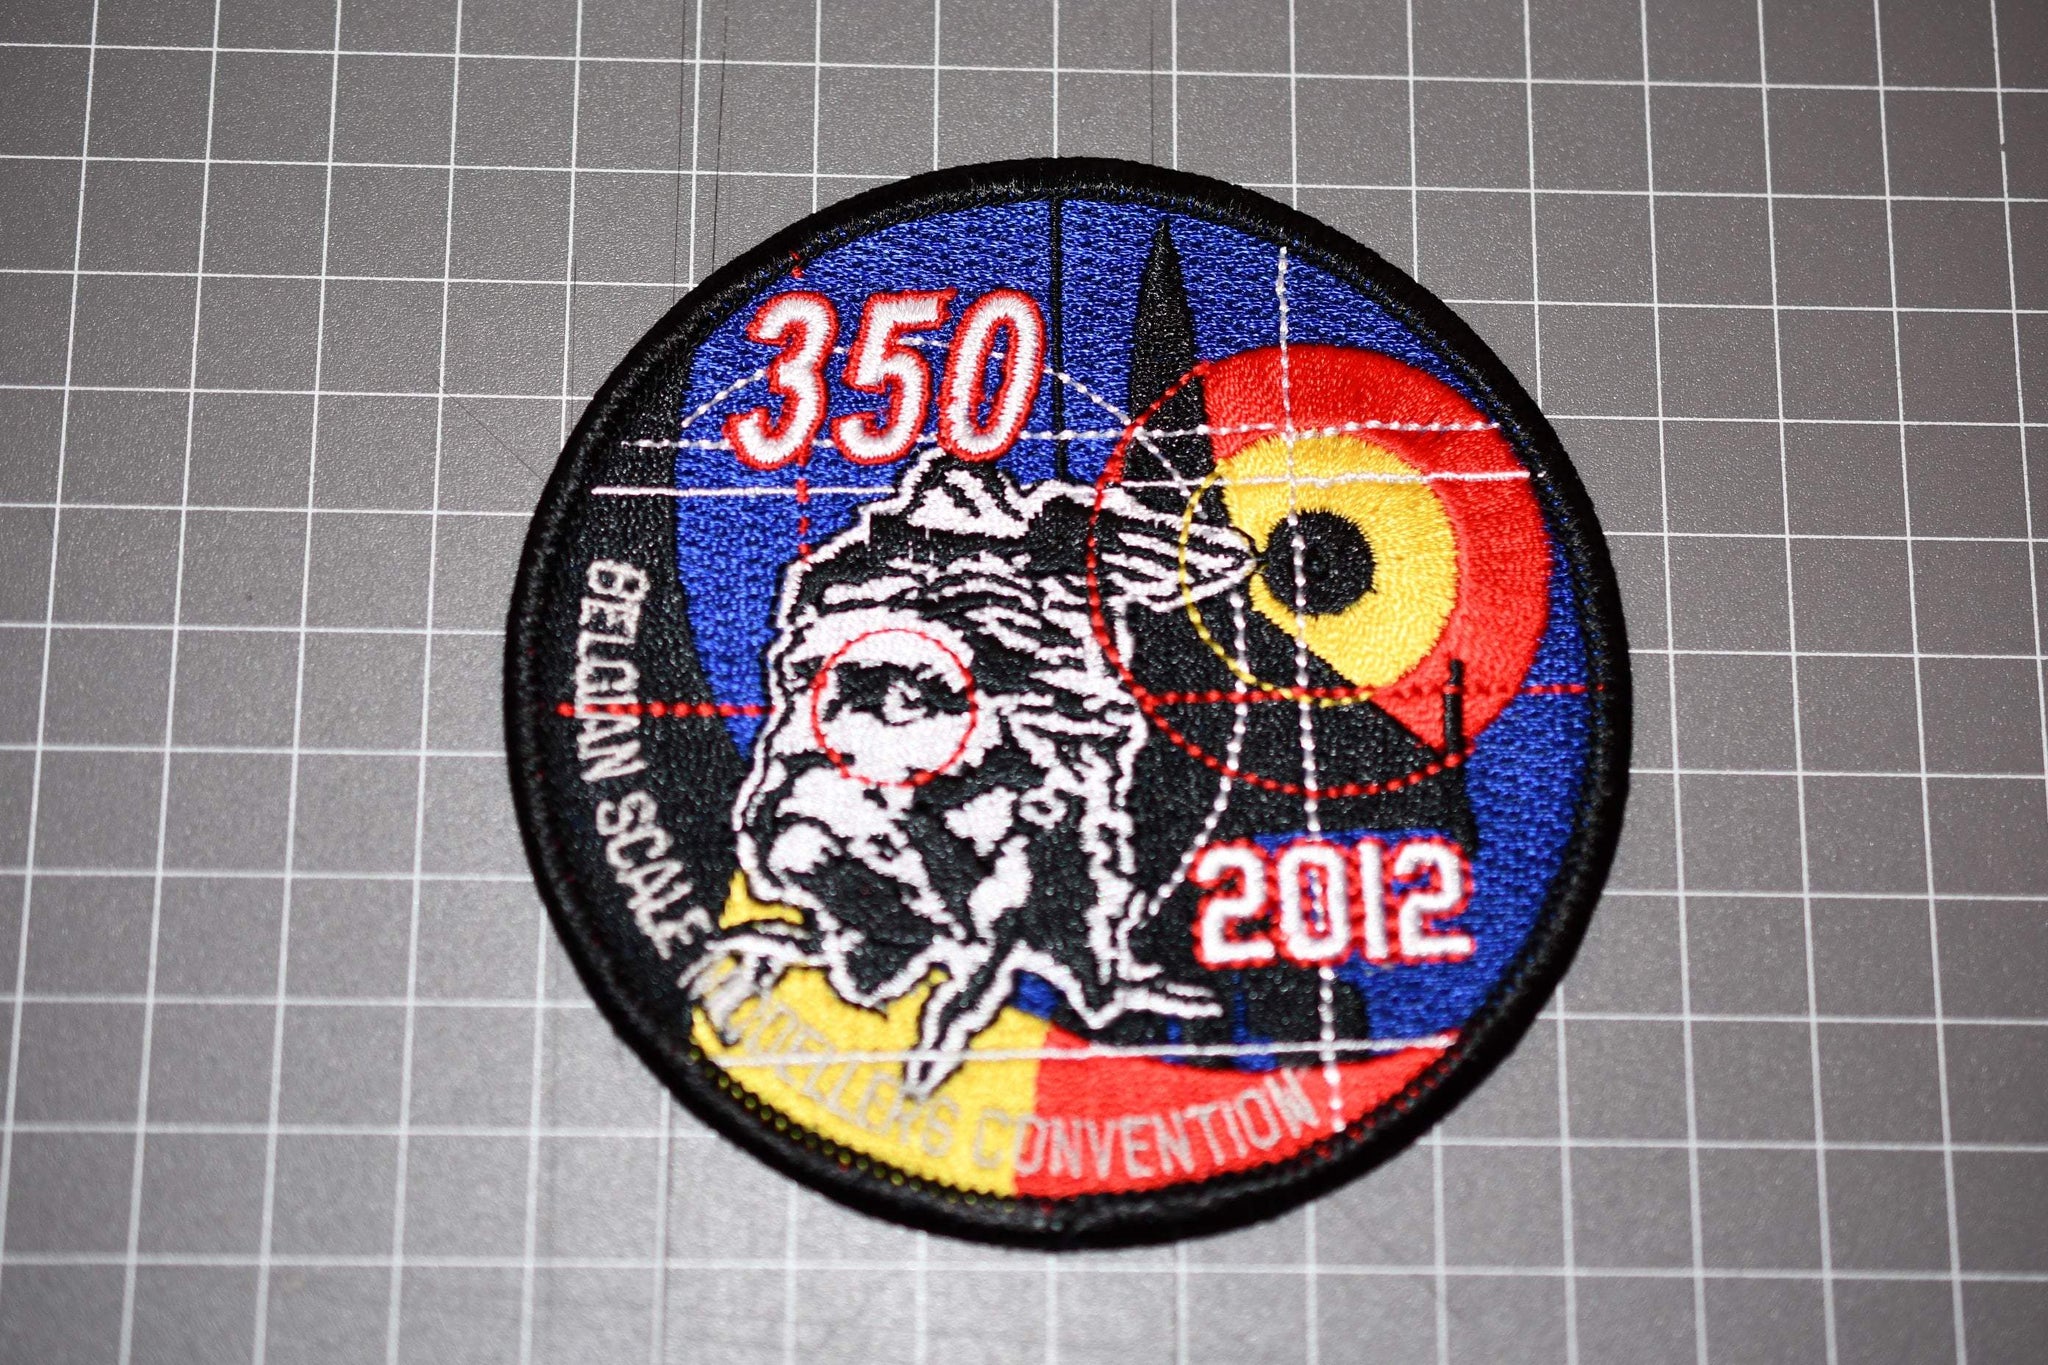 Belgian Scale Modellers Convention 2012 Patch (B10-037)